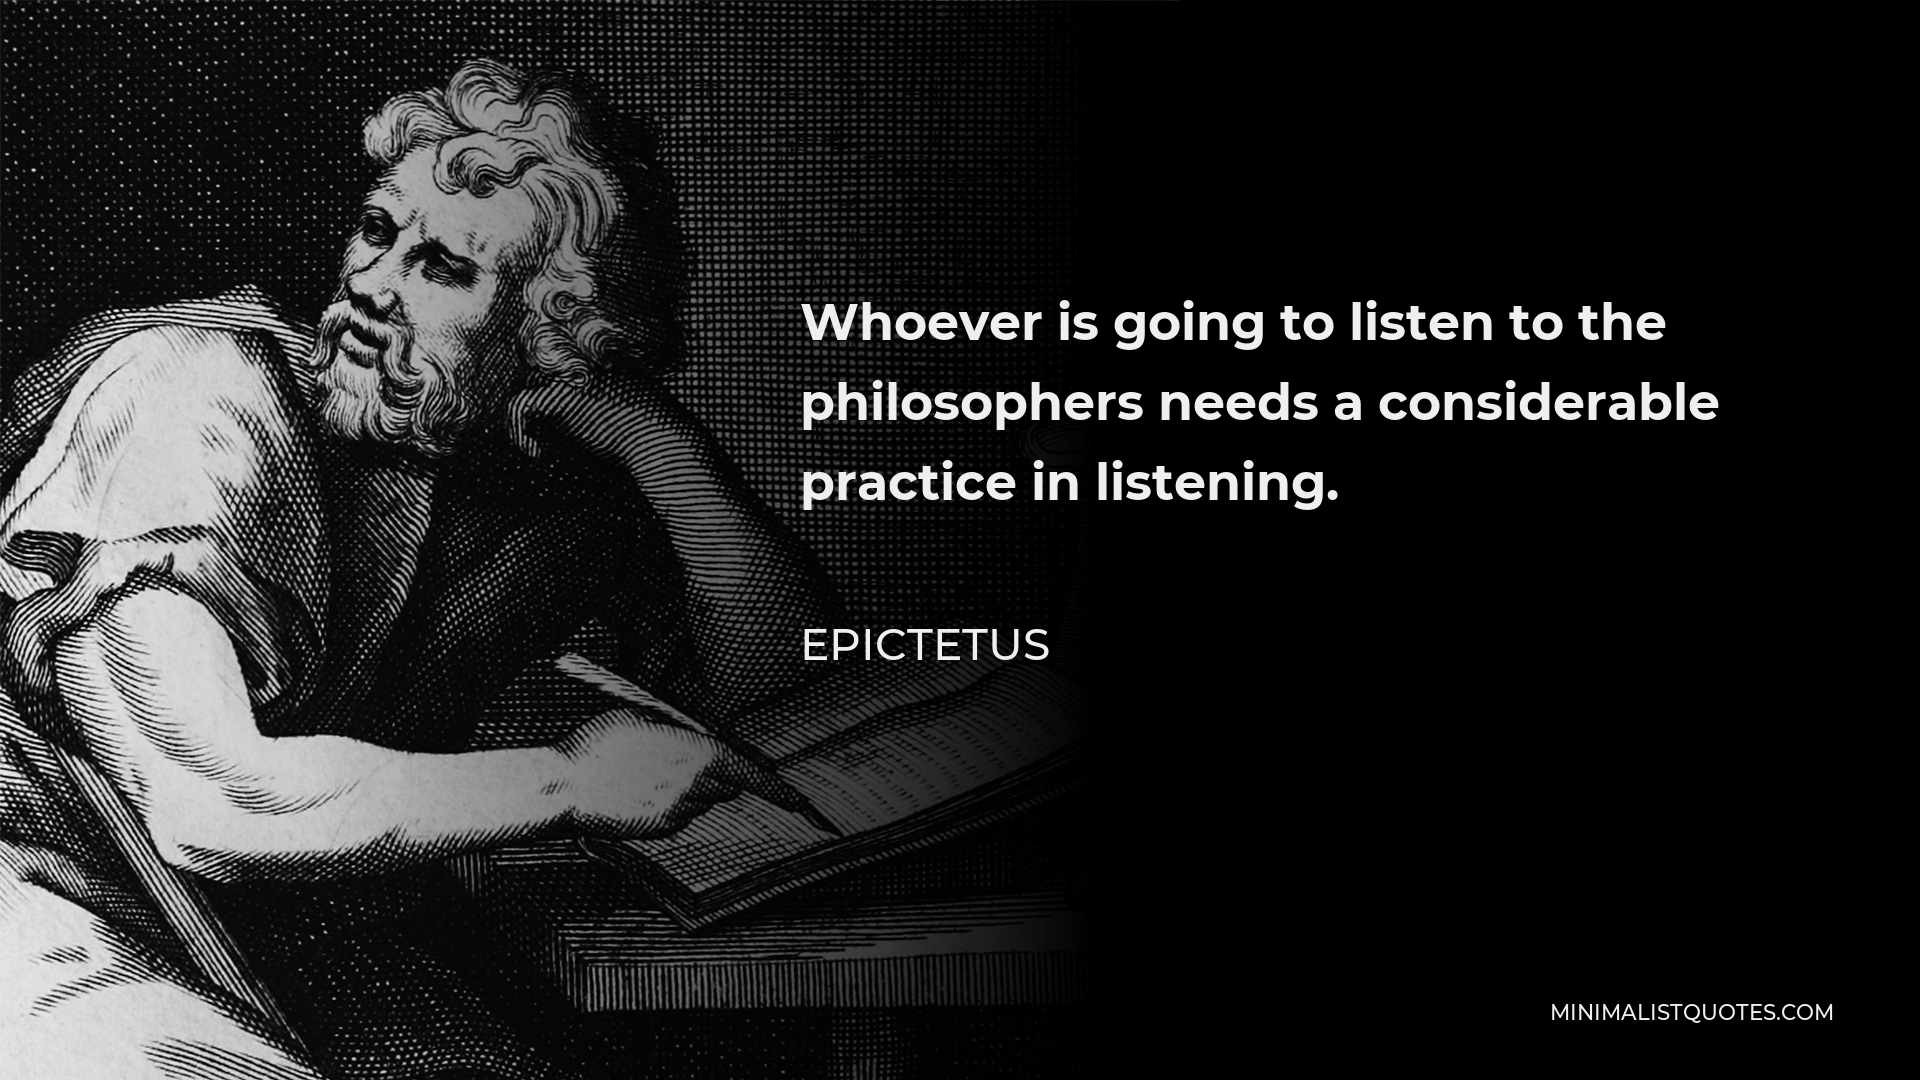 Epictetus Quote - Whoever is going to listen to the philosophers needs a considerable practice in listening.